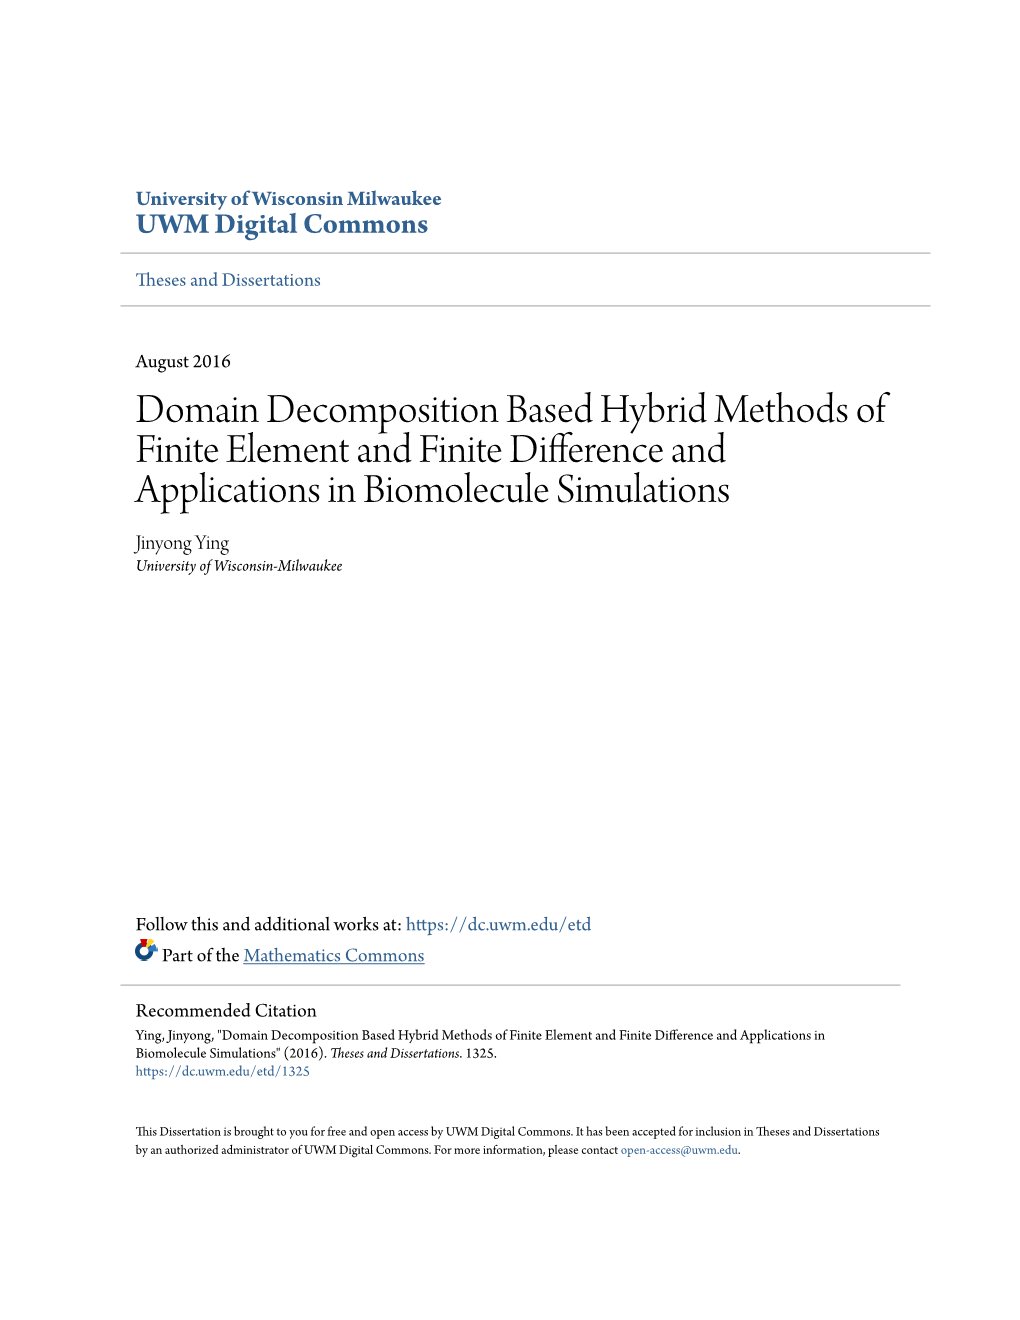 Domain Decomposition Based Hybrid Methods of Finite Element And